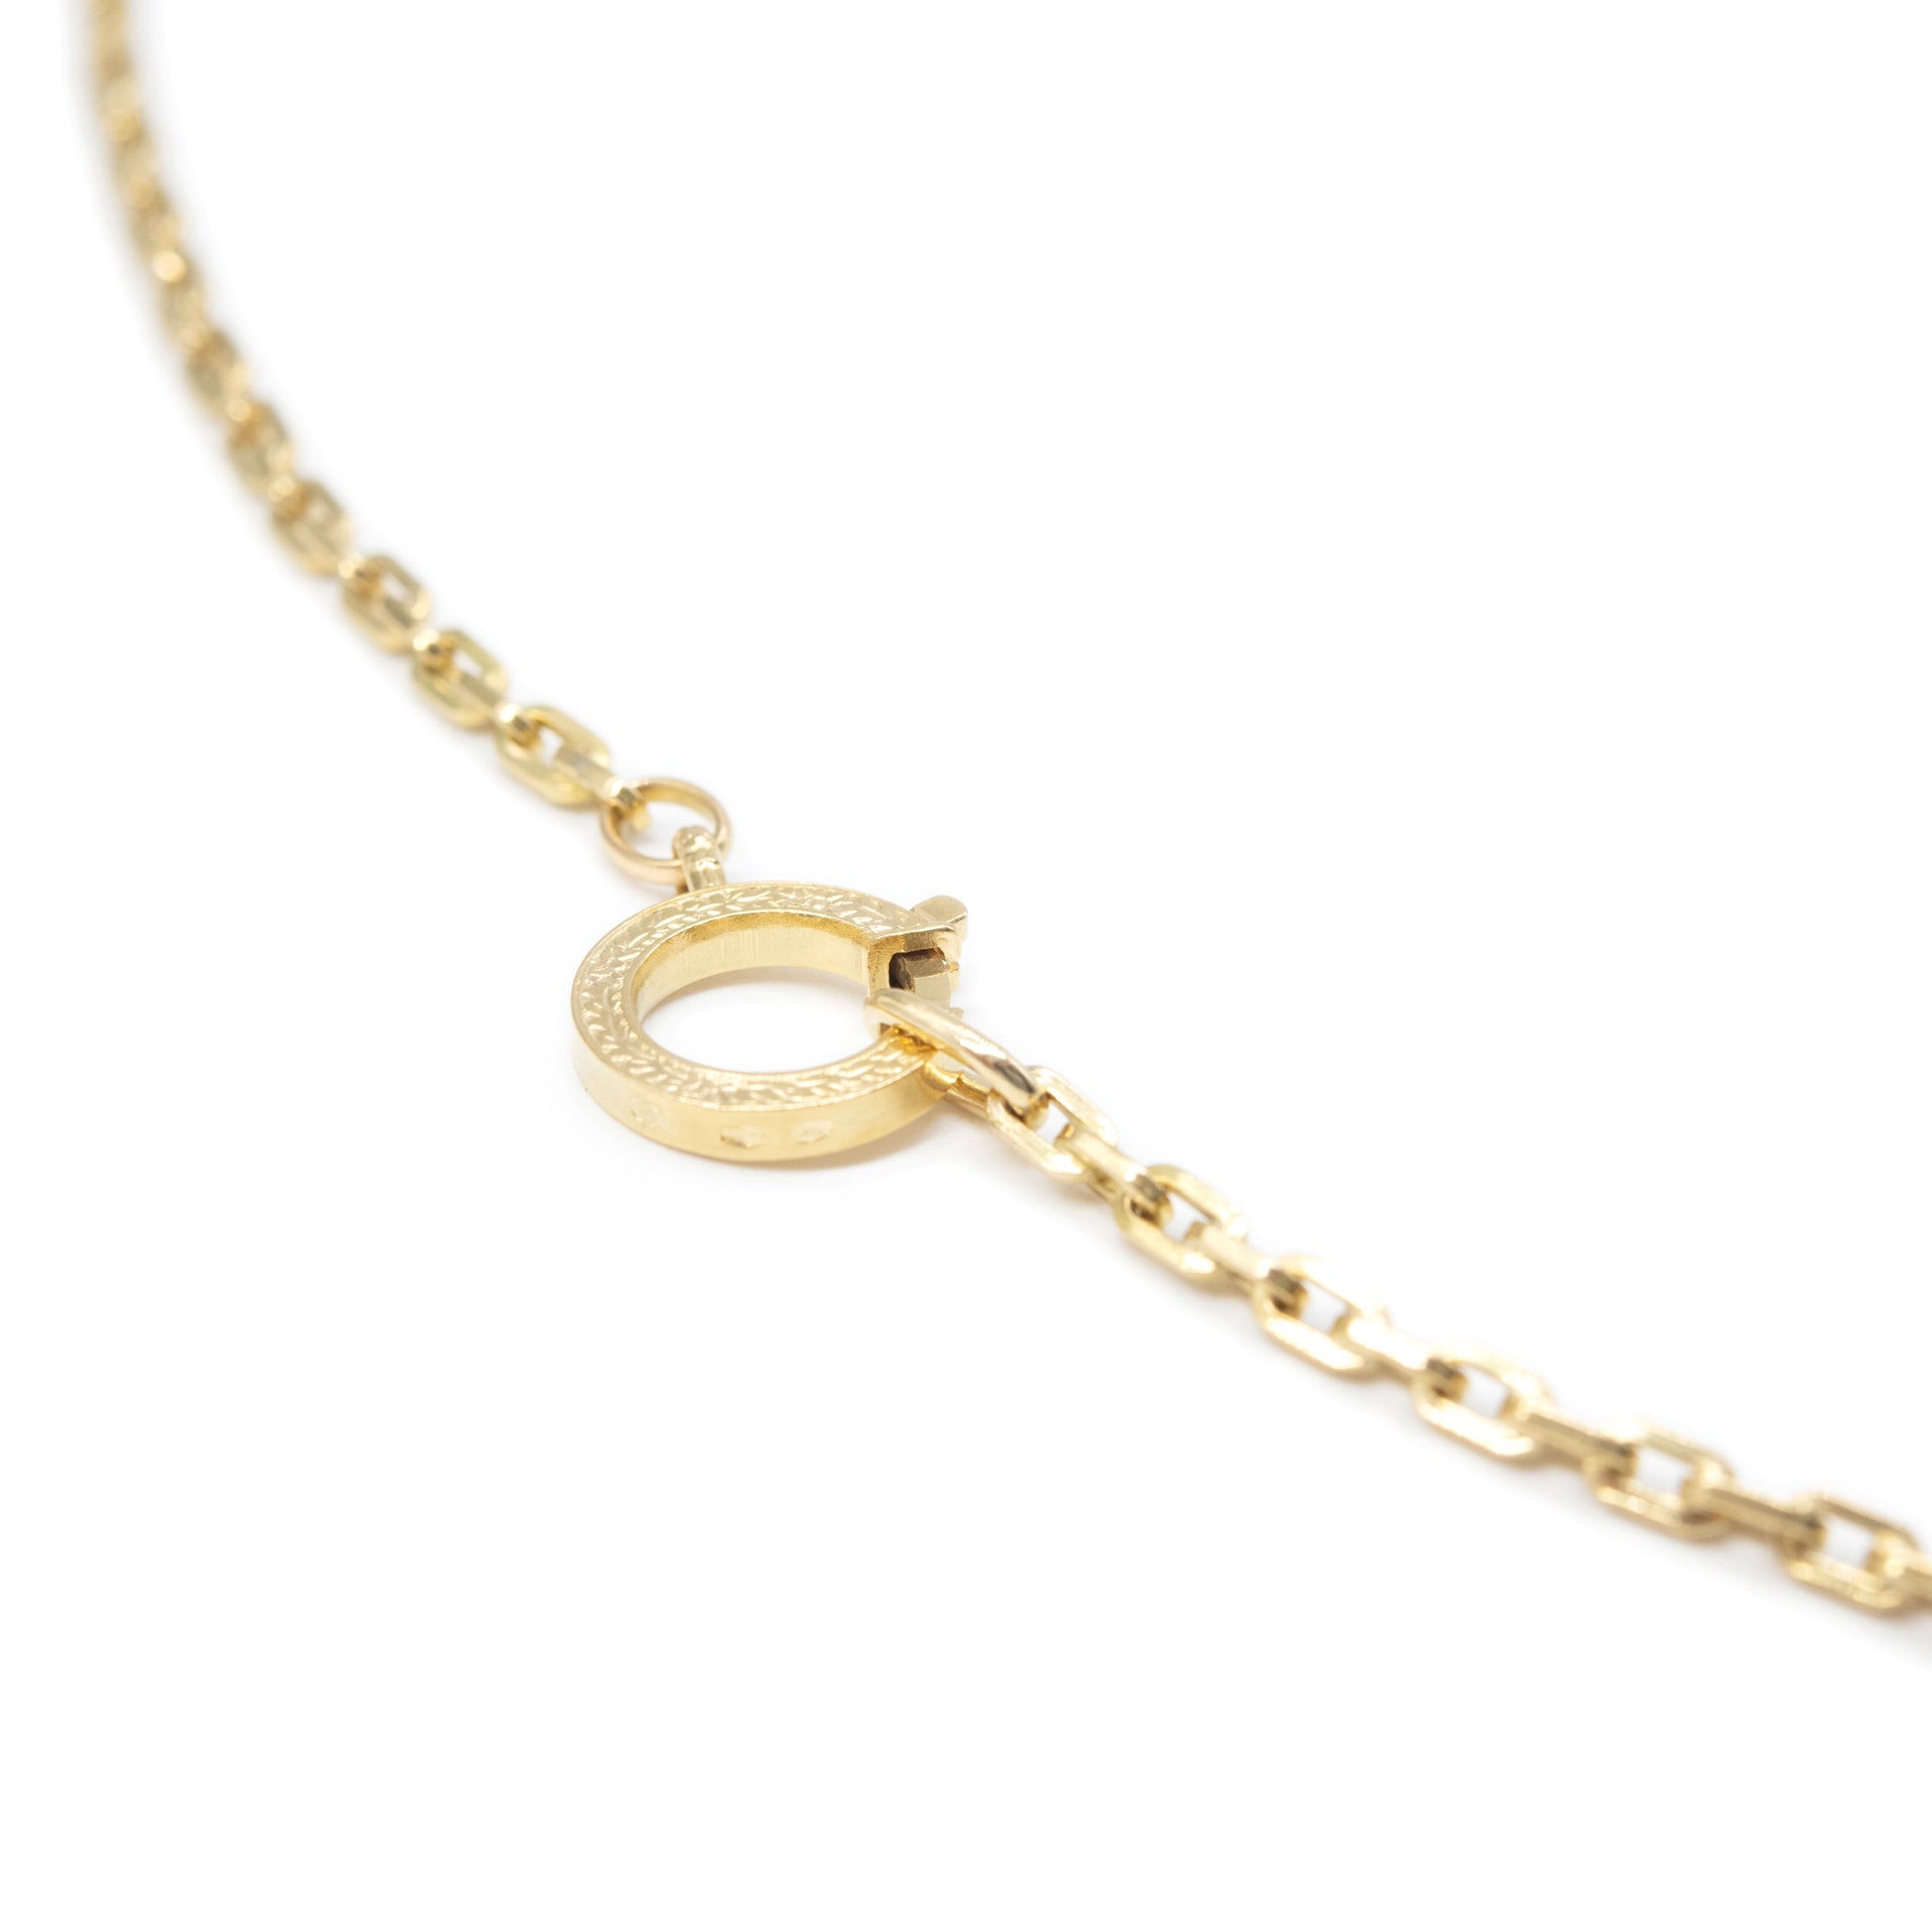 Vintage Gold Chain Necklaces For Women | Filippa | Vintage Jewelry | Lil Milan